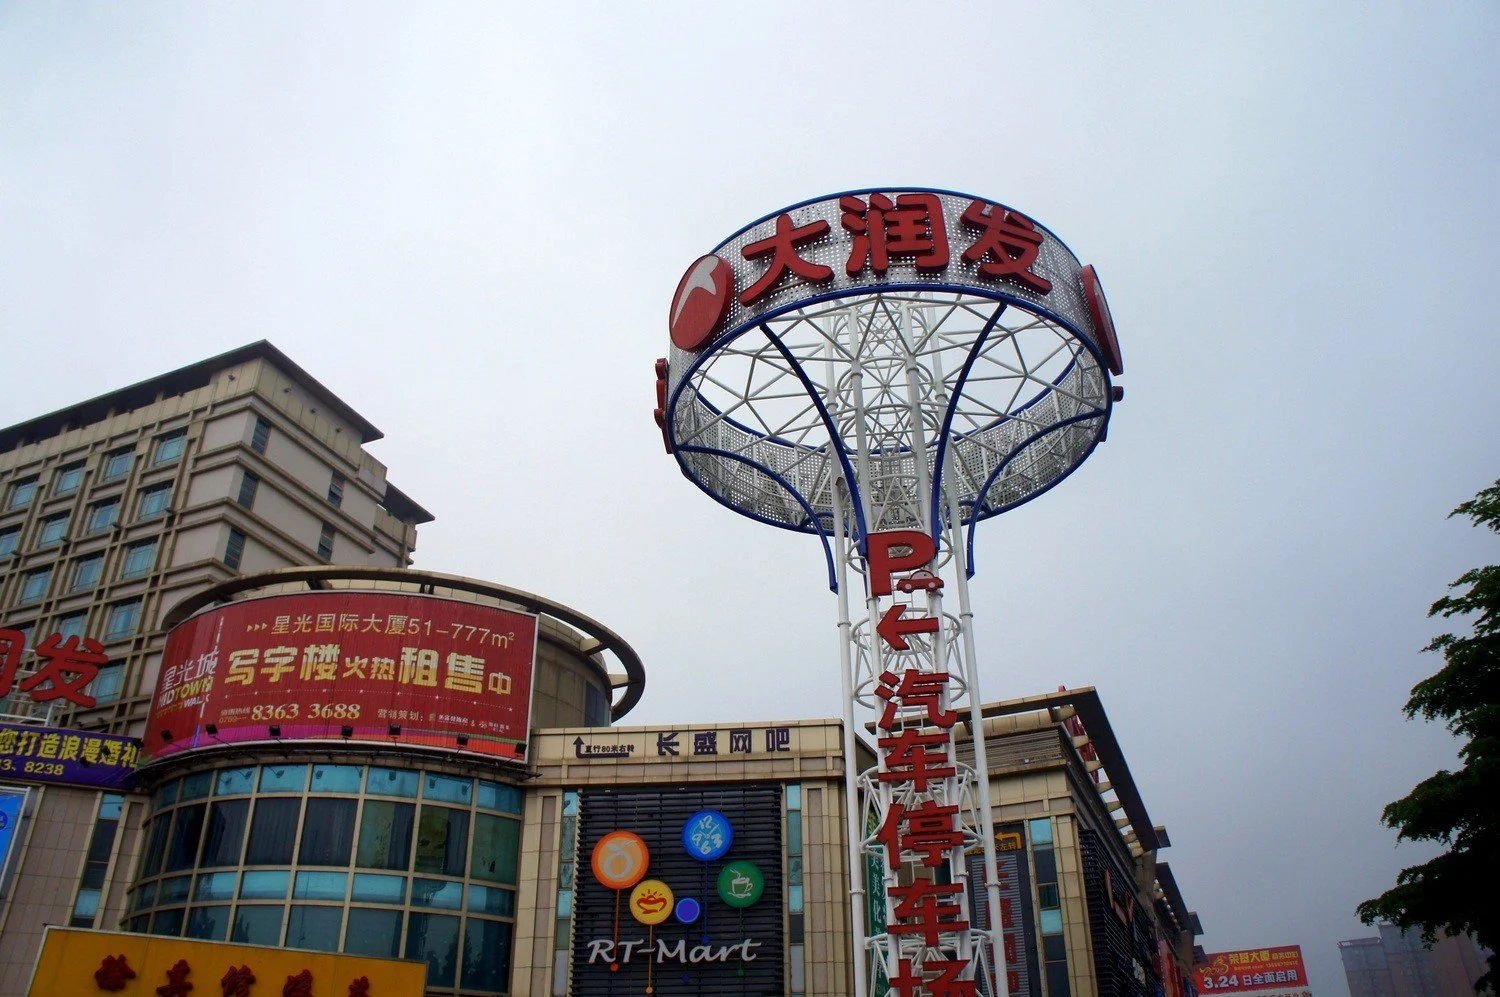 The city center of Dongguan, known as the 